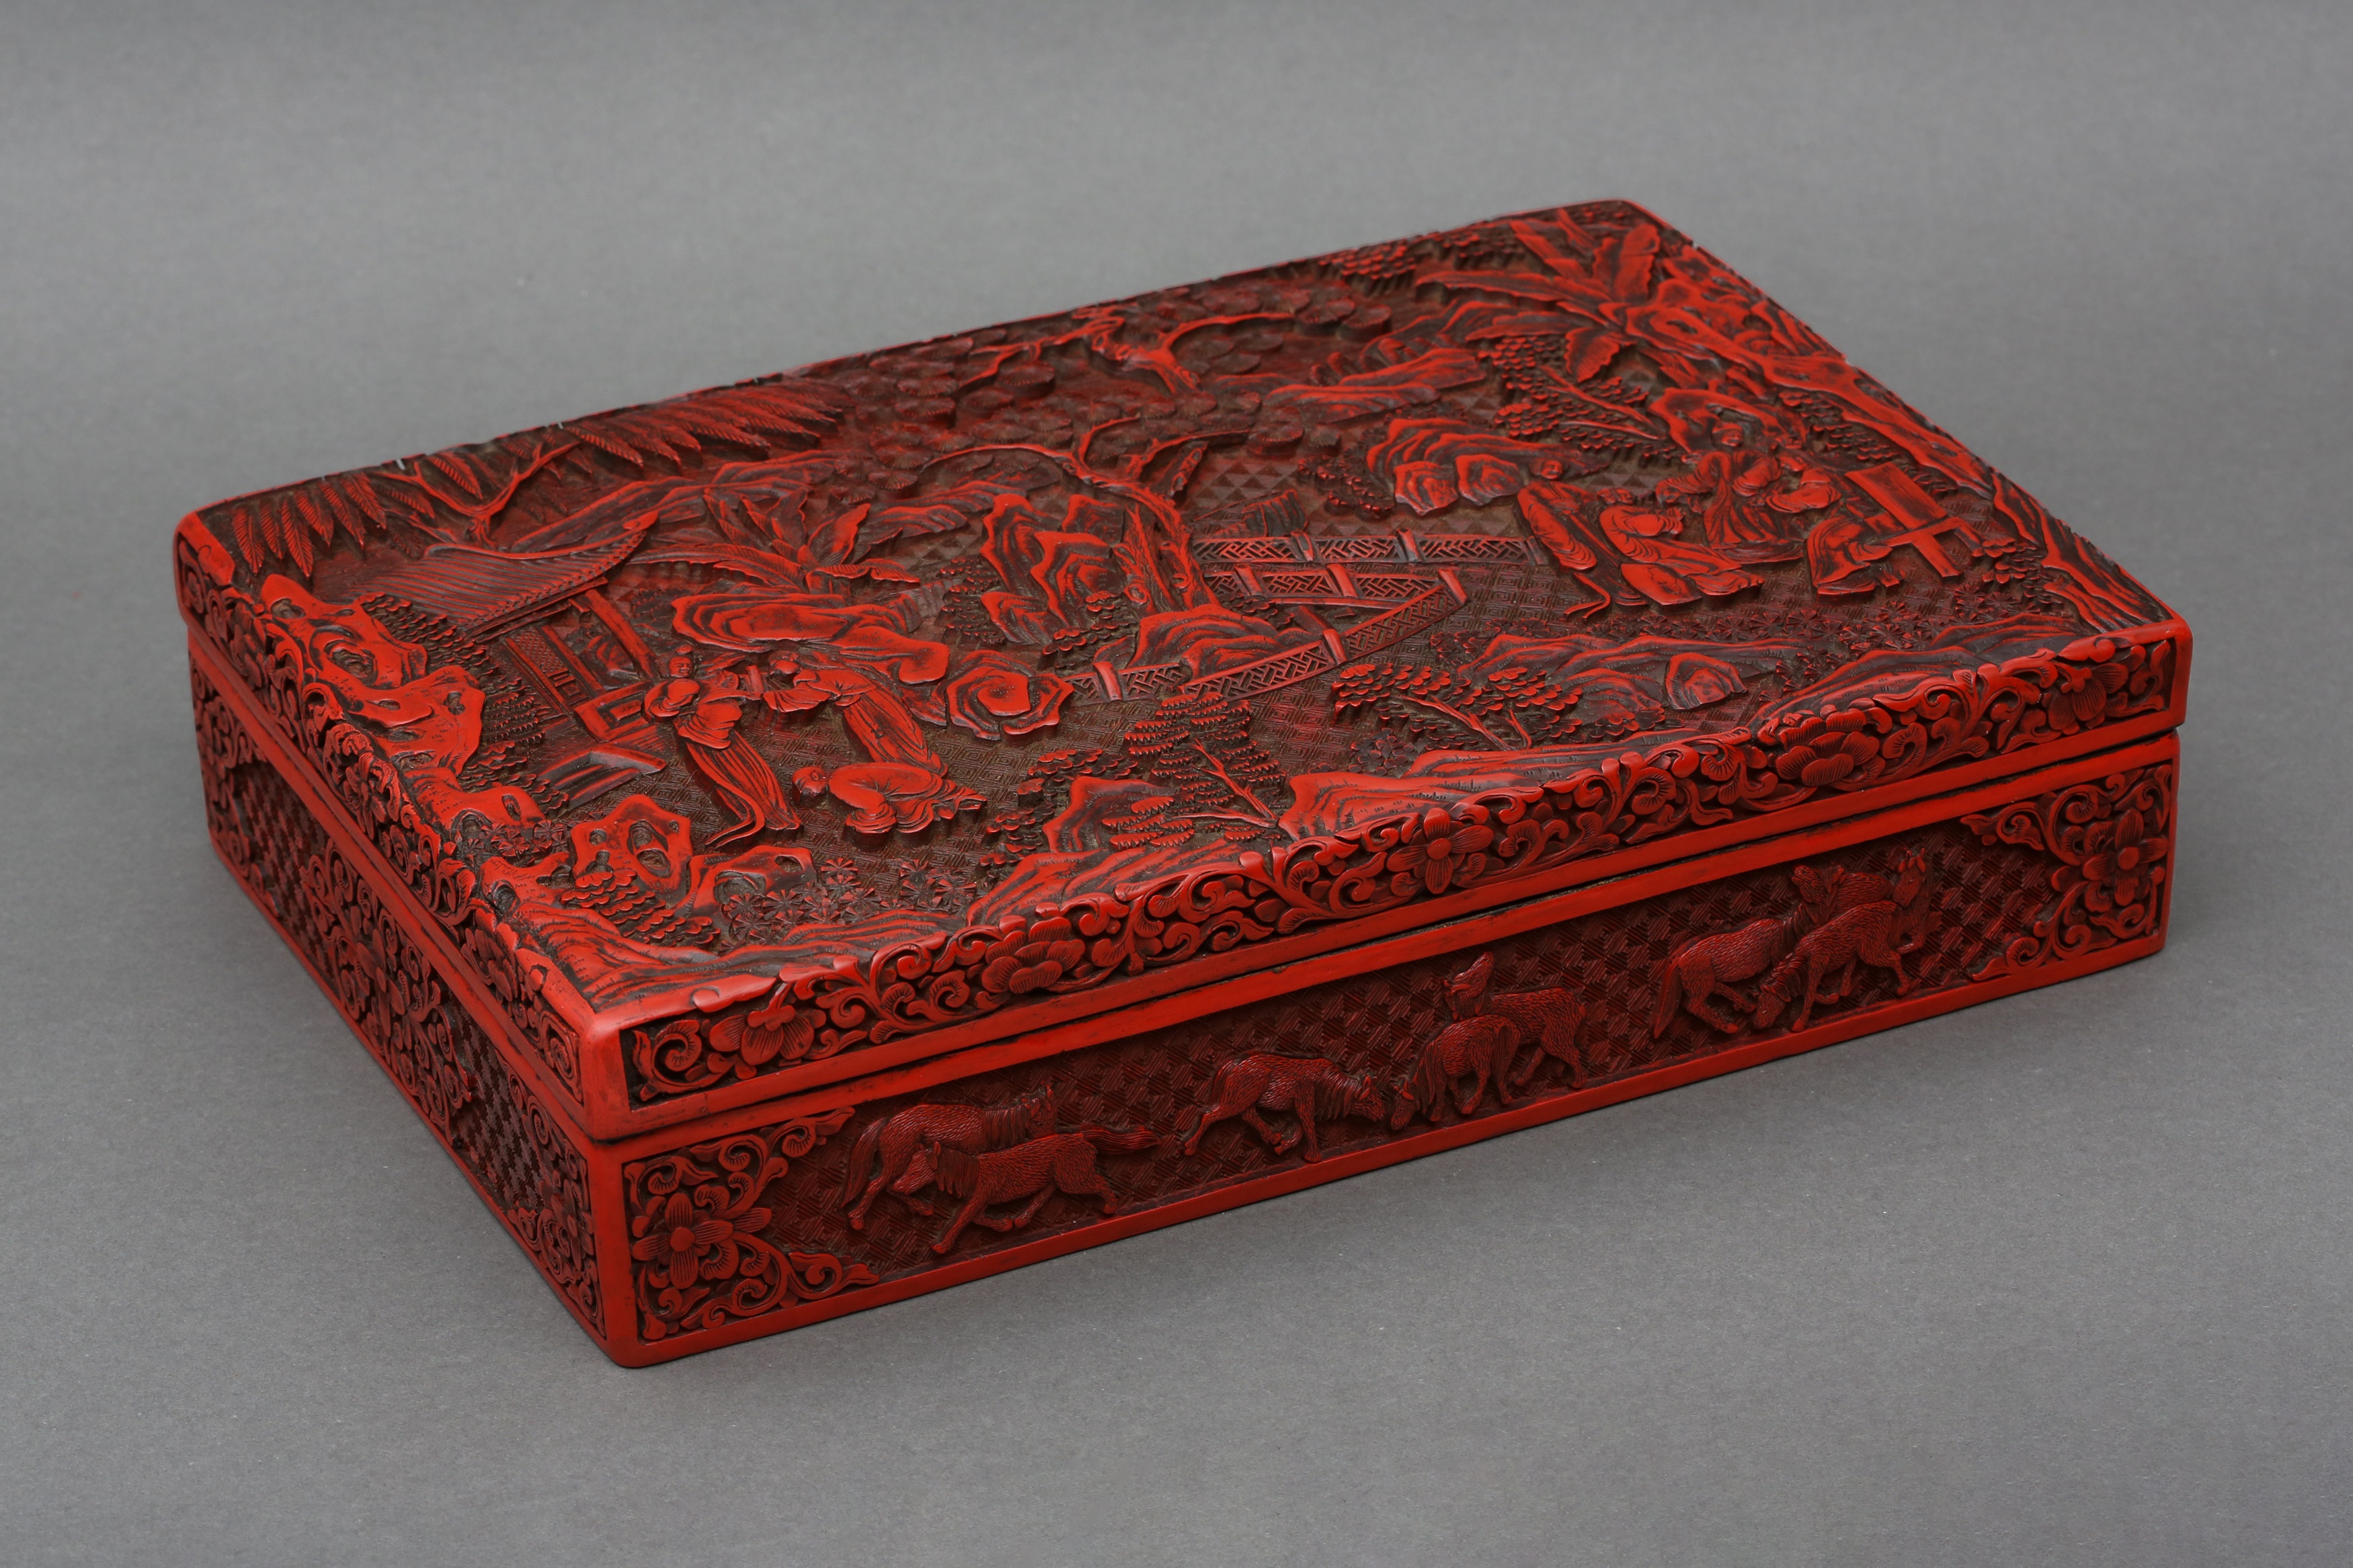 A LARGE AND FINE CHINESE CINNABAR LACQUER 'FIGURAL' BOX AND COVER 早十九世紀 剔紅人物故事圖紋方蓋盒